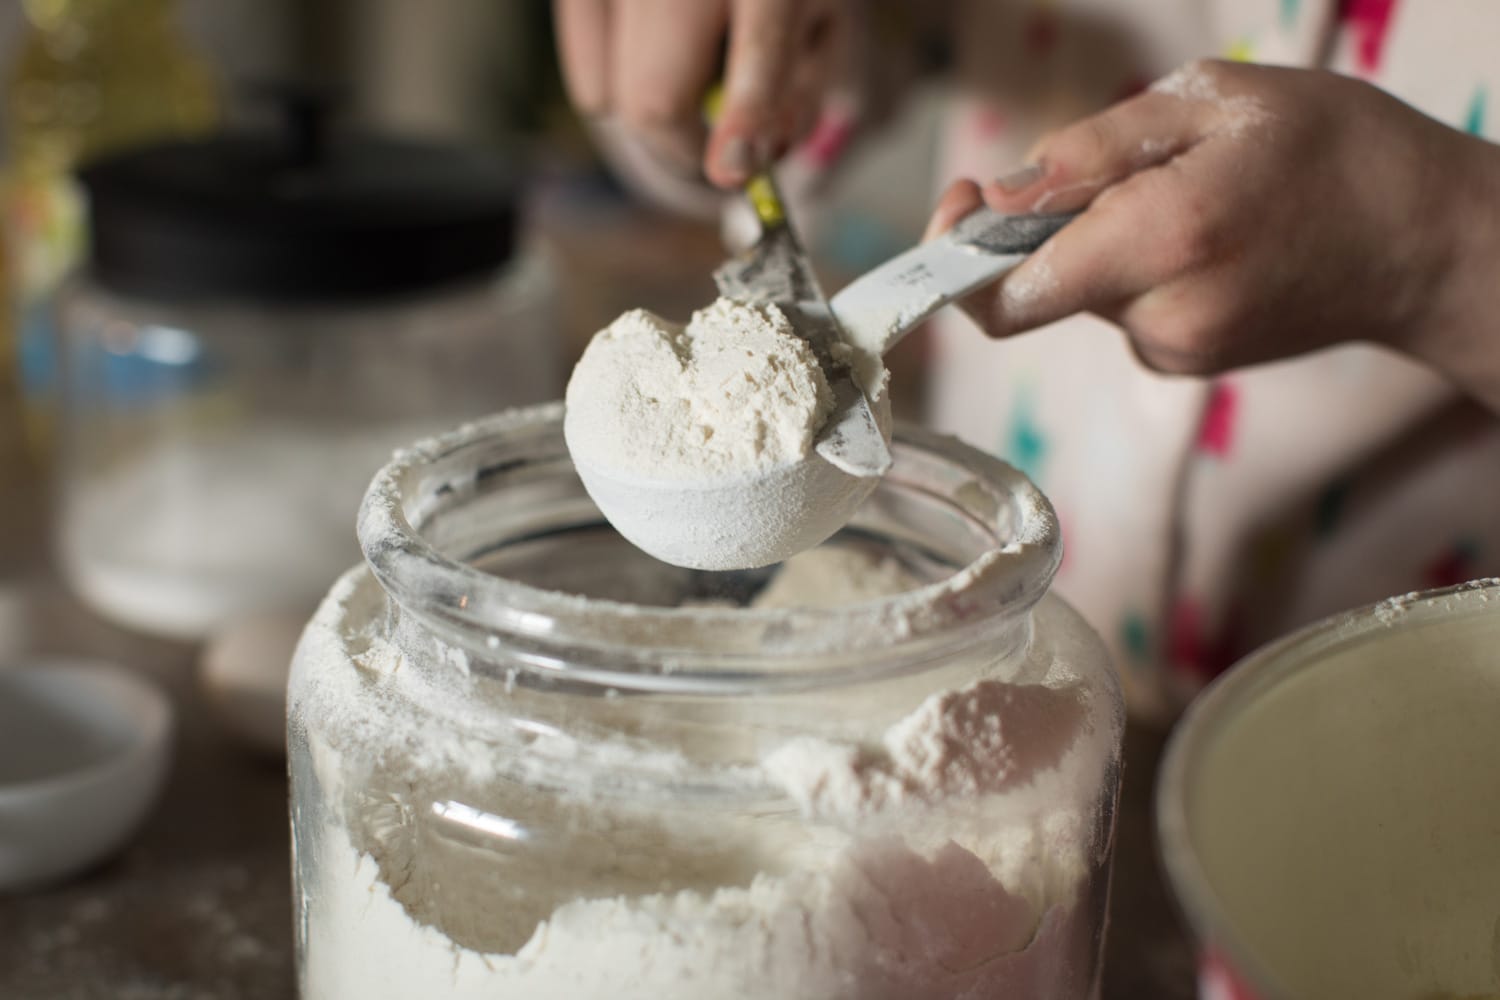 Close up of young girl's hands measuring flour while baking